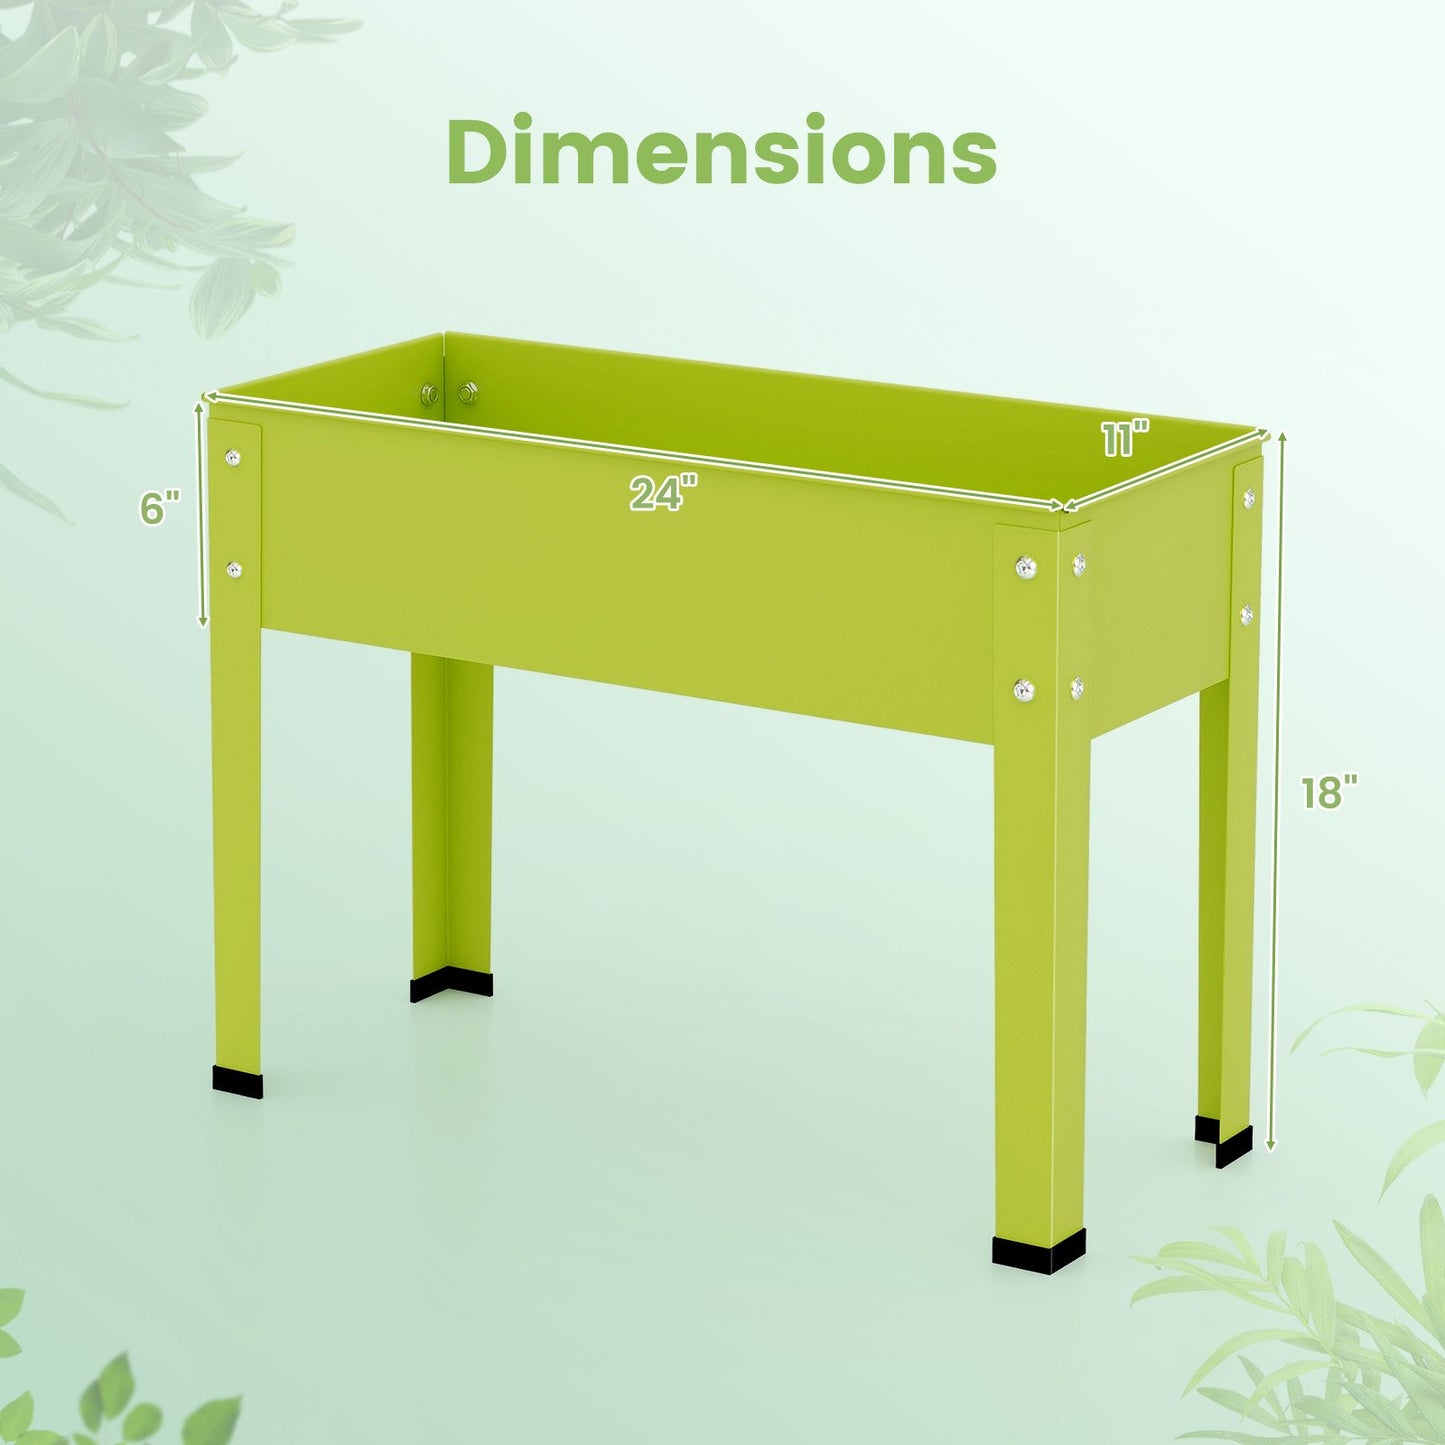 Metal Raised Garden Bed with Legs and Drainage Hole-24 x 11 x 18 inches, Green